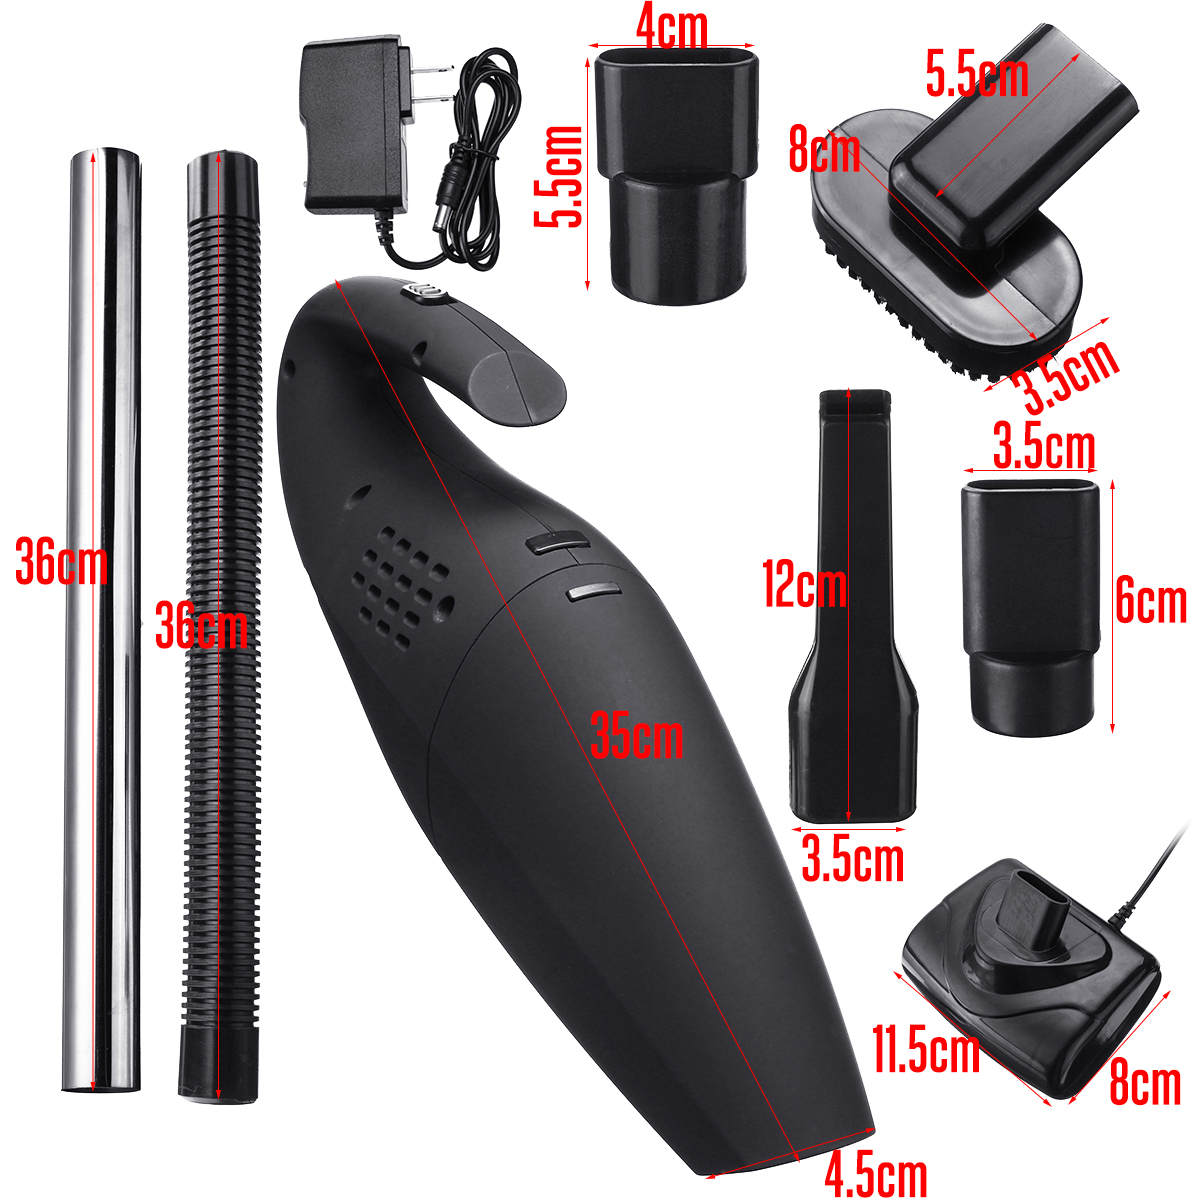 110-240V-120W-Handheld-Car-Wireless-Vacuum-Cleaner-With-High-Power-Dual-Purpose-Wet--Dry-Portable-Re-1581227-10